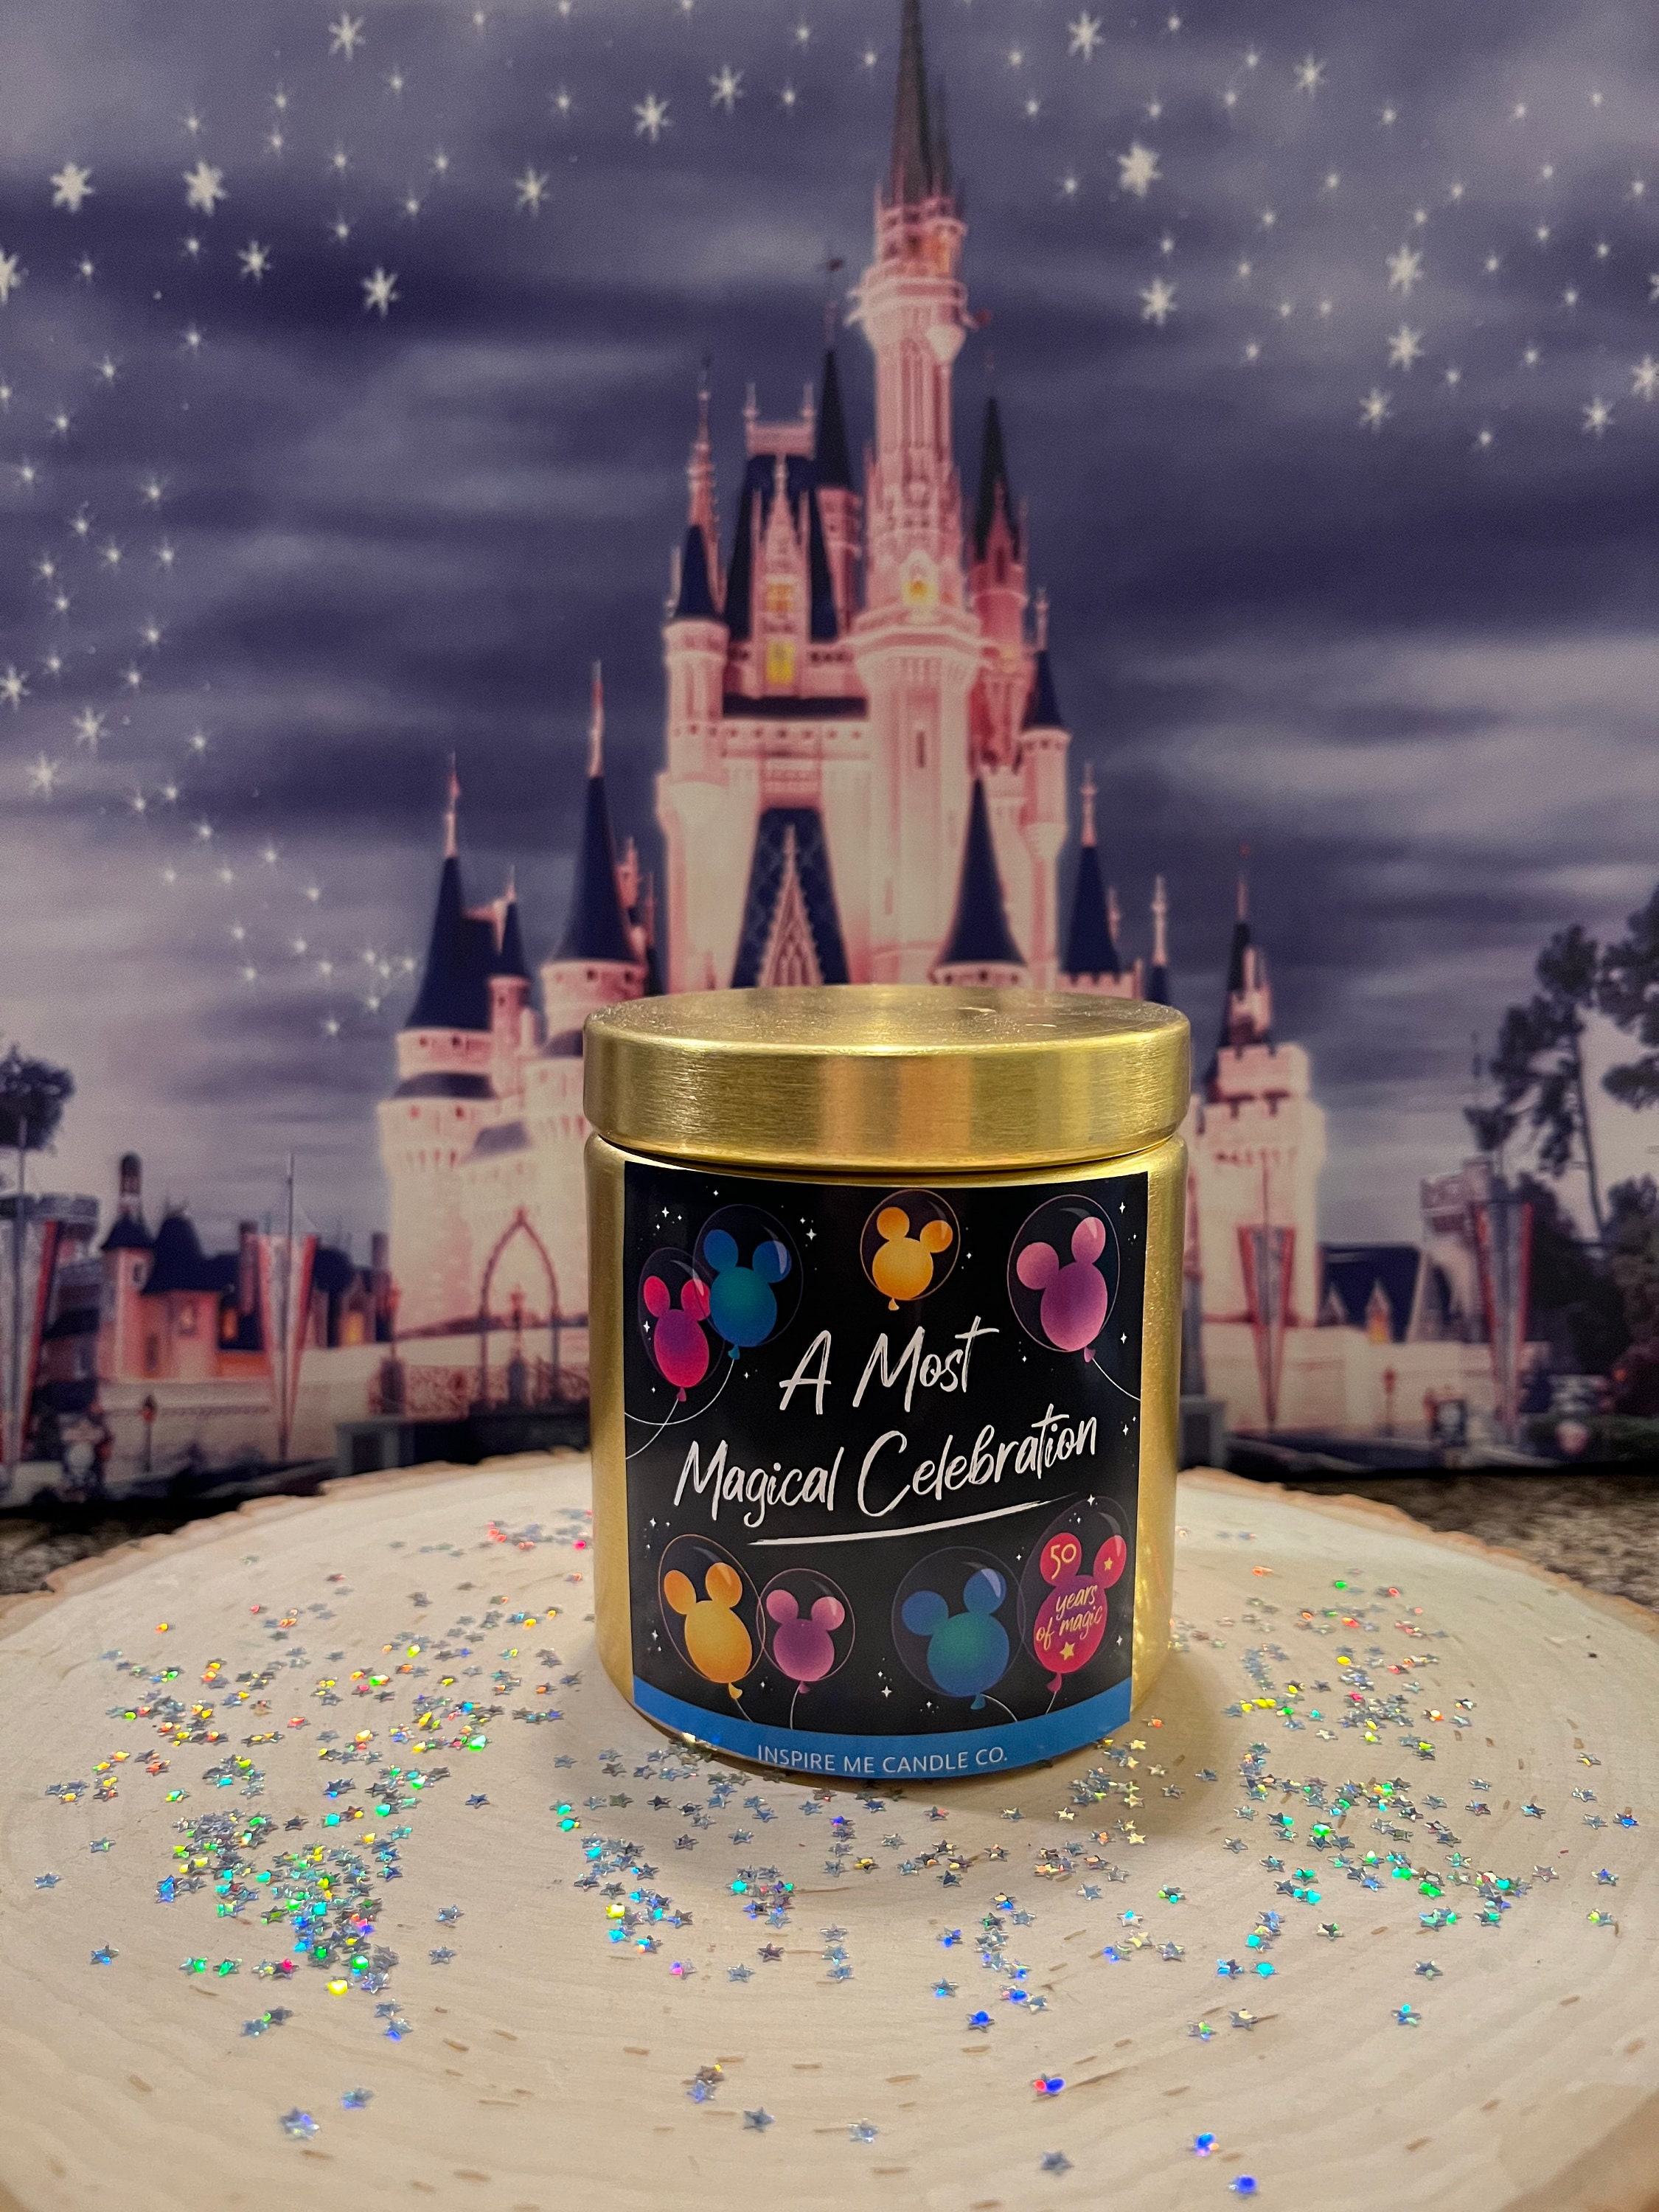 Disney 50th Anniversary Ultimate Mickey and Minnie Mouse Scentsy